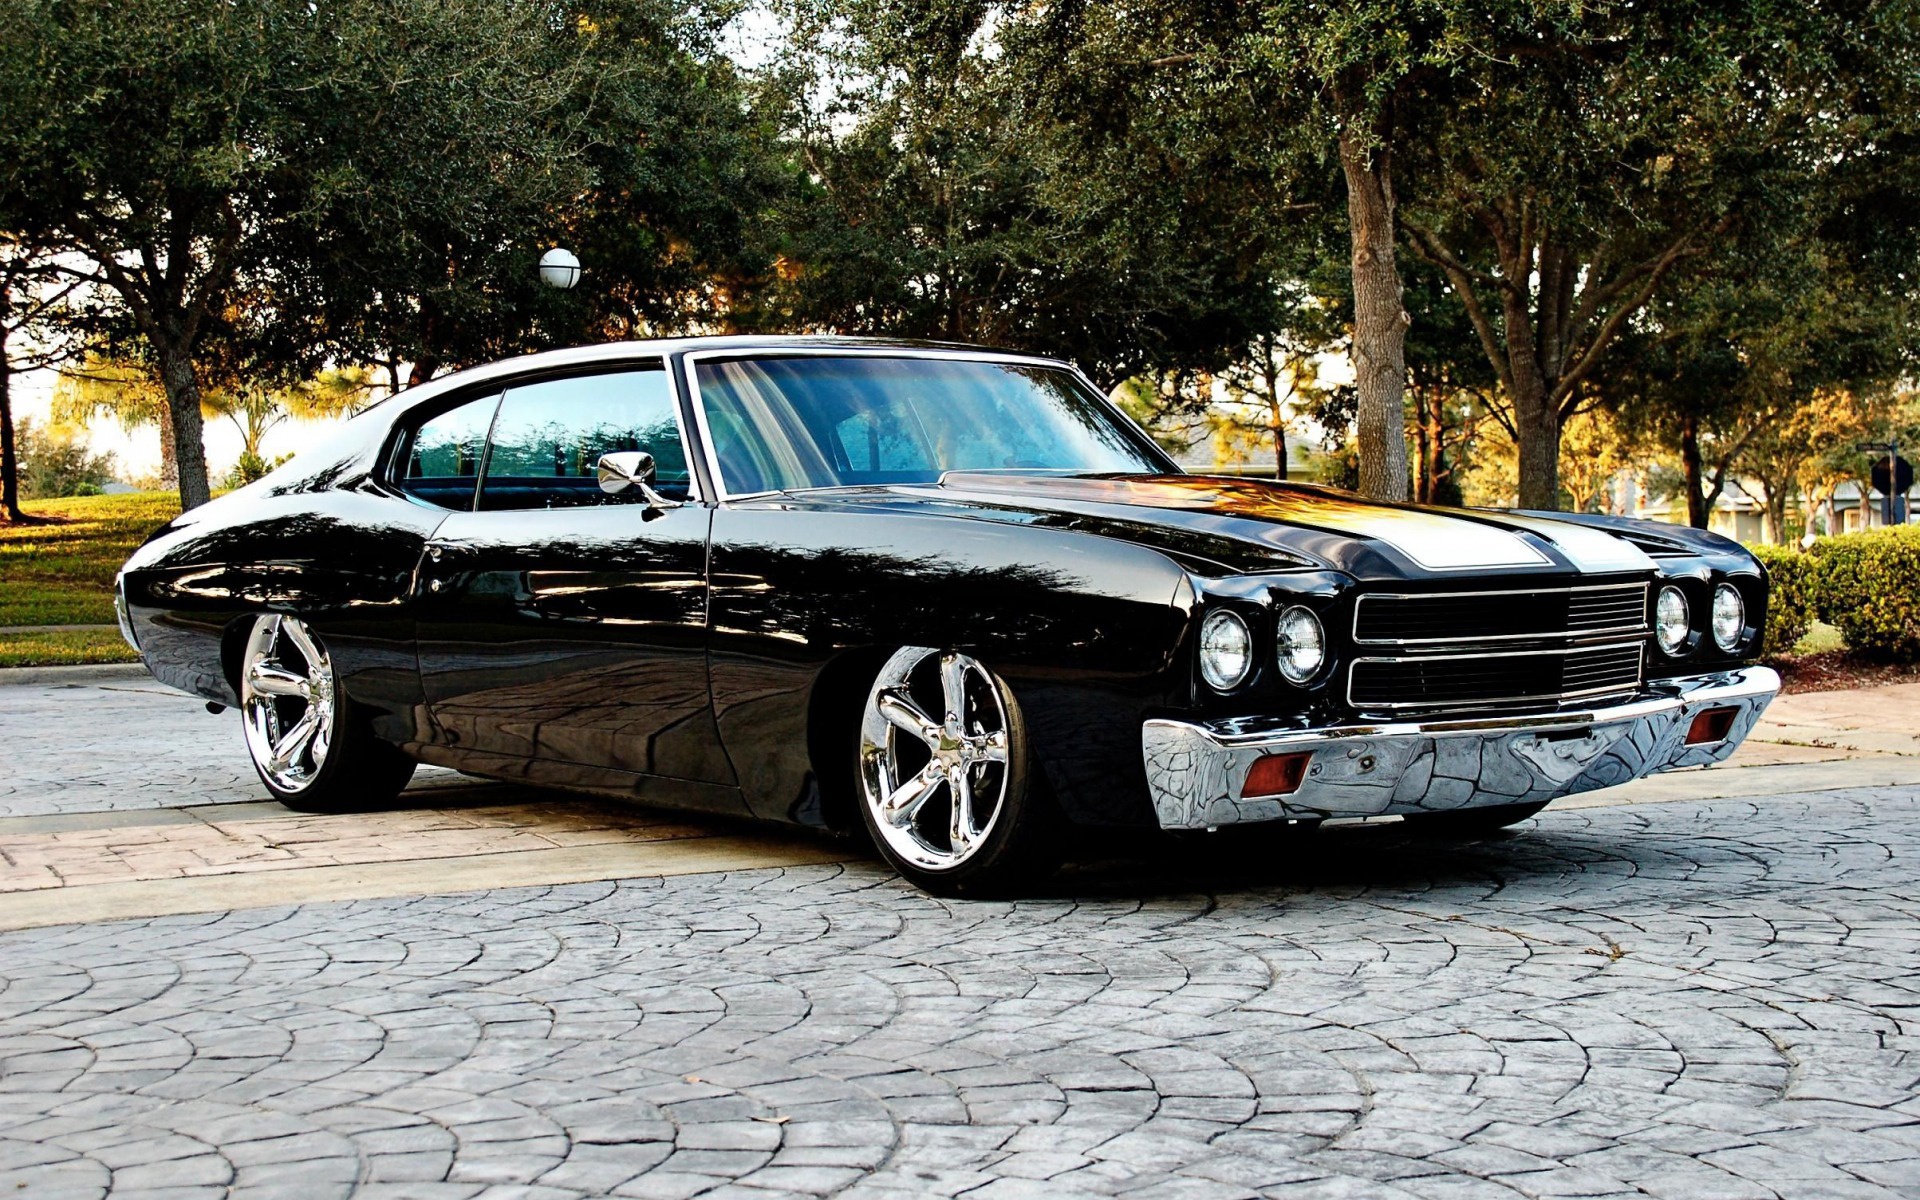 Chevrolet, Chevelle, Muscle car, Vehicle. 